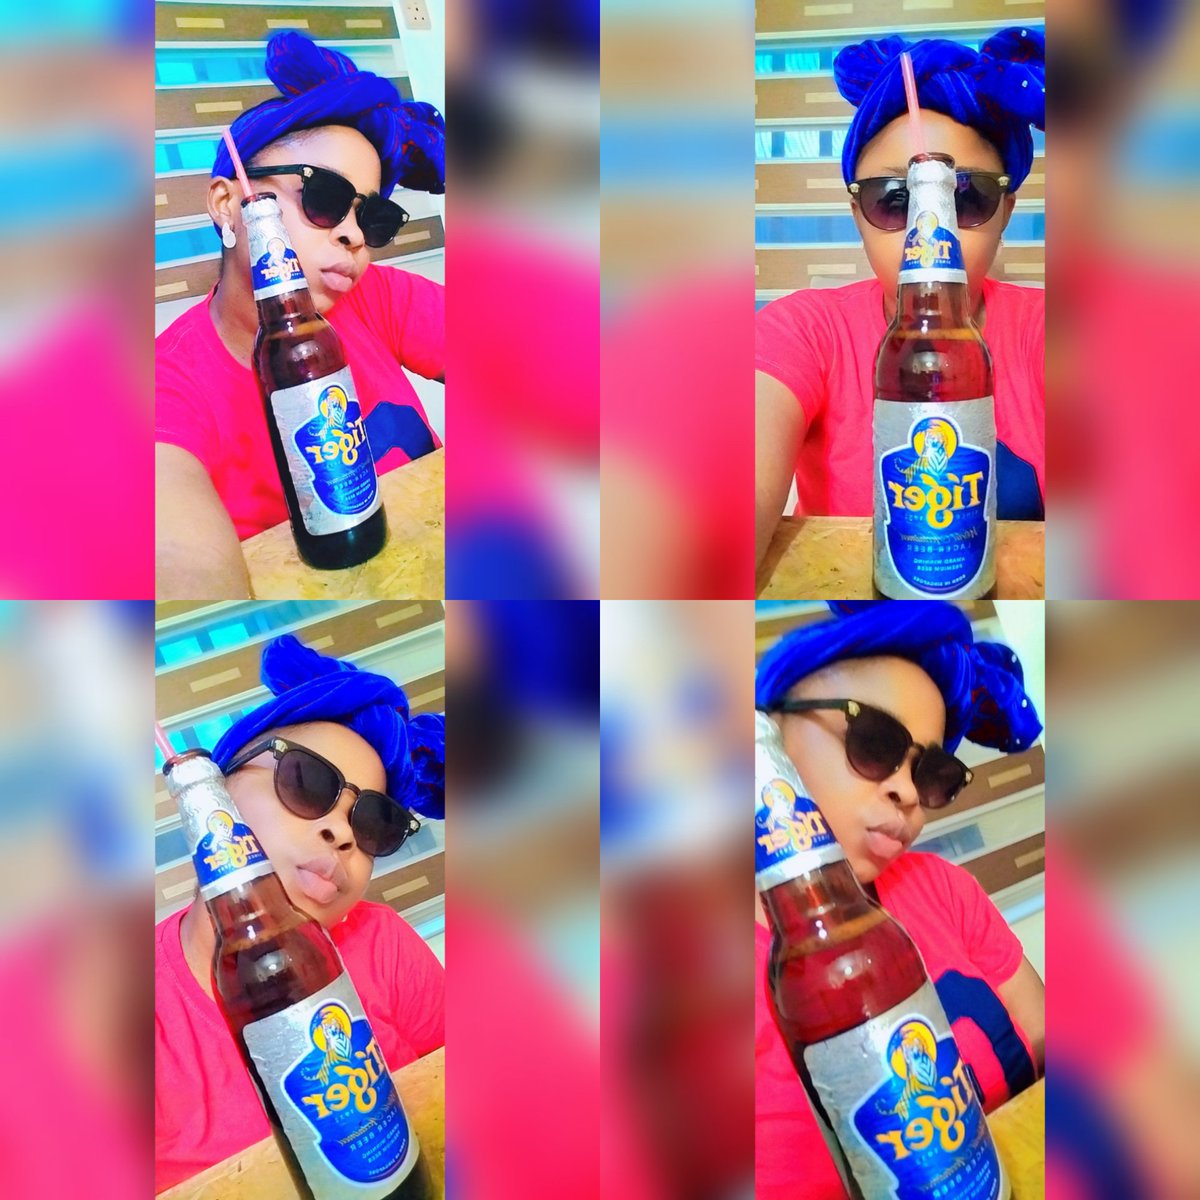 Boogie with Straw Challenge
All for my Girl @LiquoroseAfije_ 
For the love of @tigerbeer_ng 
#BoogieWithLiquorTiger 
#tigerbeer
#Liquorose𓃵 
A Date With Liquorose😋🦁👌💃🤸
#NewProfilePic 
LIQUOROSE TIGER BEER CHALLENGE
DO IT LIKE LIQUOROSE